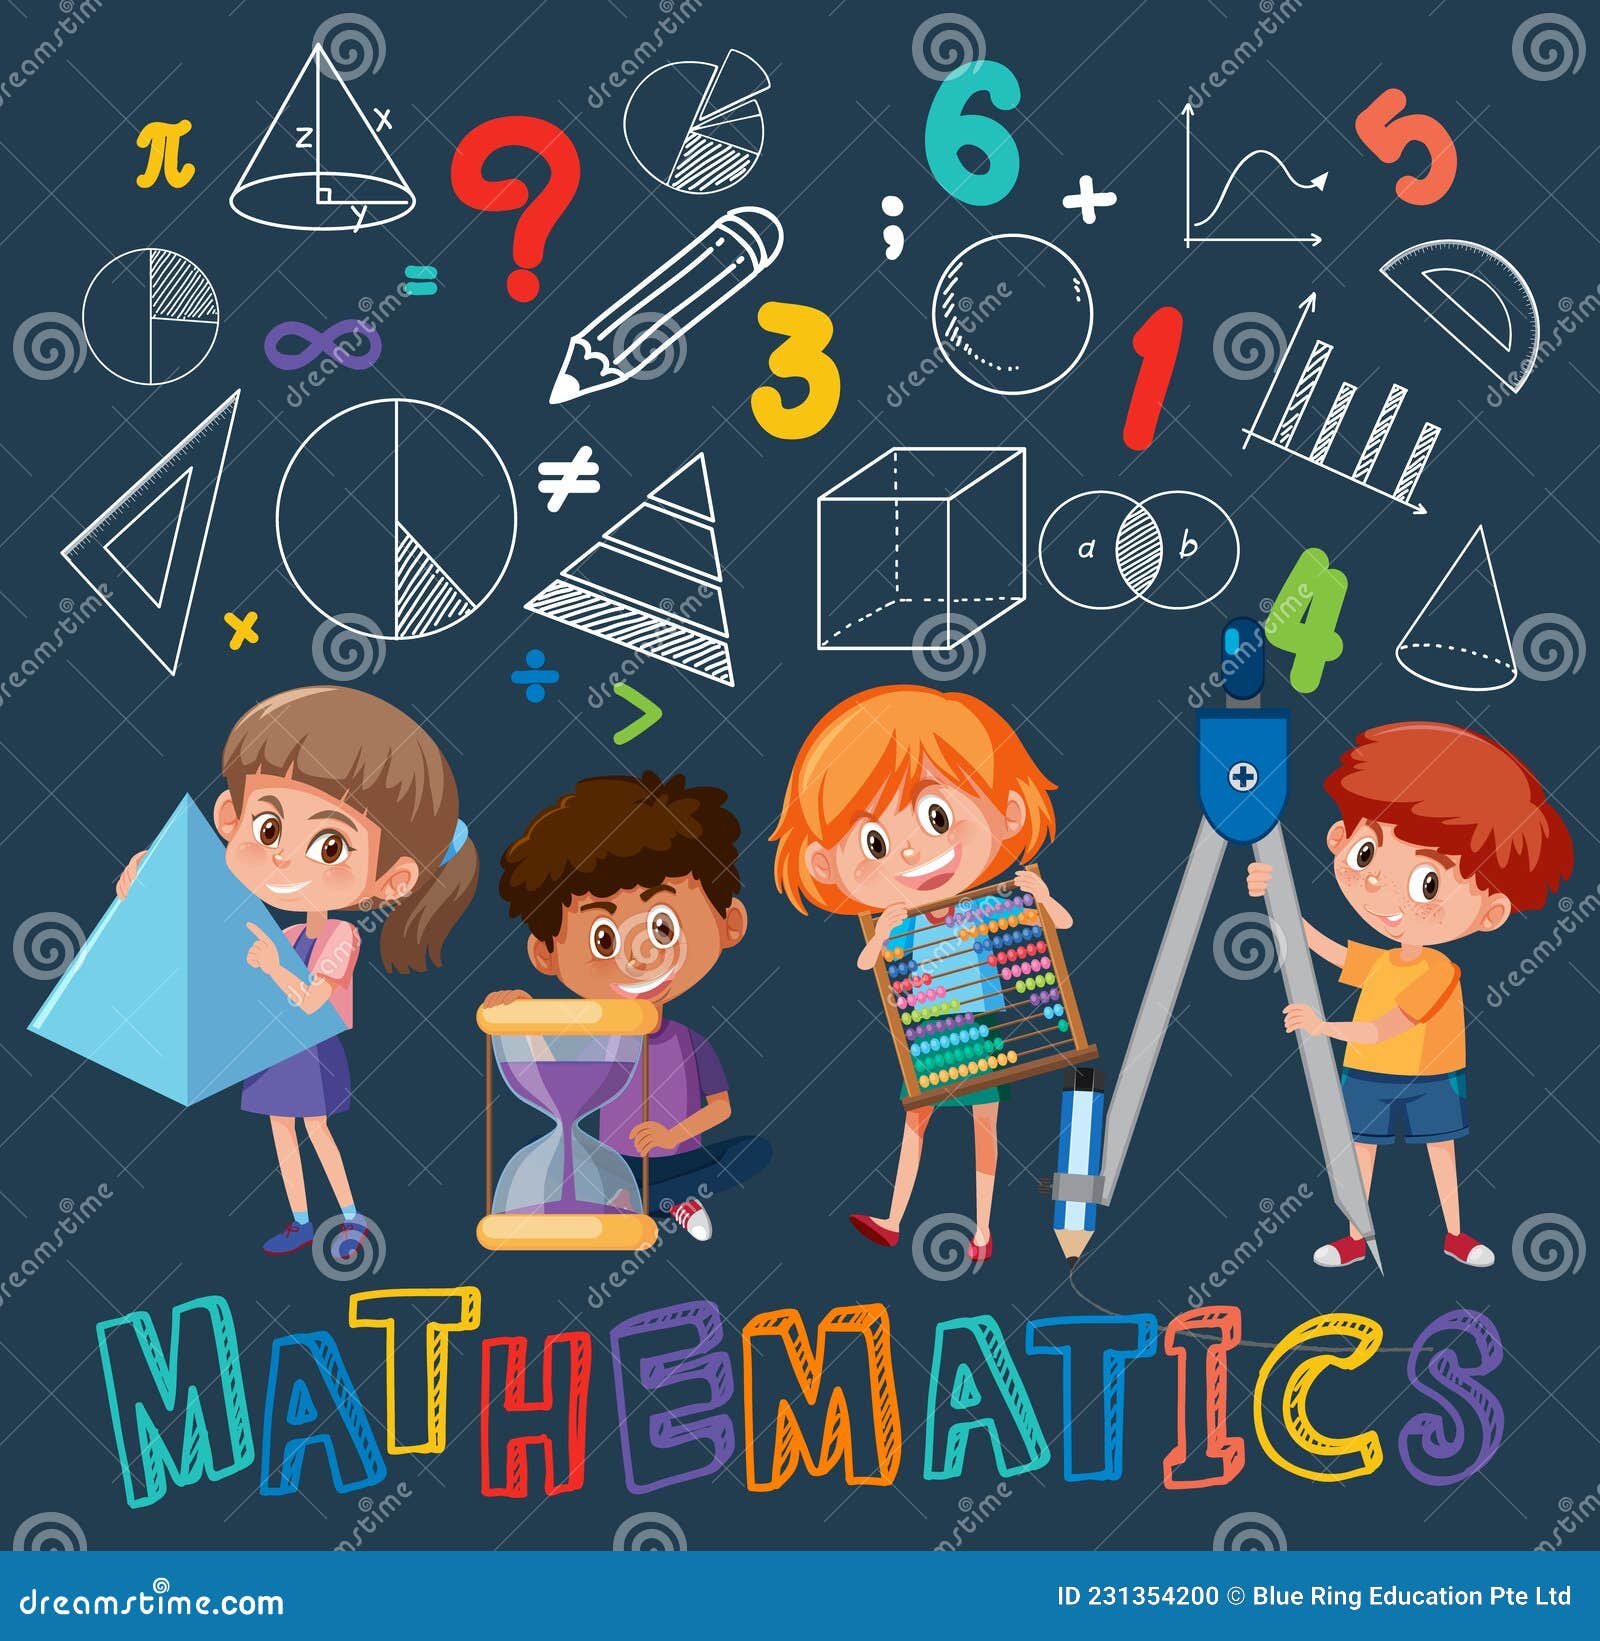 Free Math & Engineering Posters and Desktop Wallpaper - Maplesoft Posters